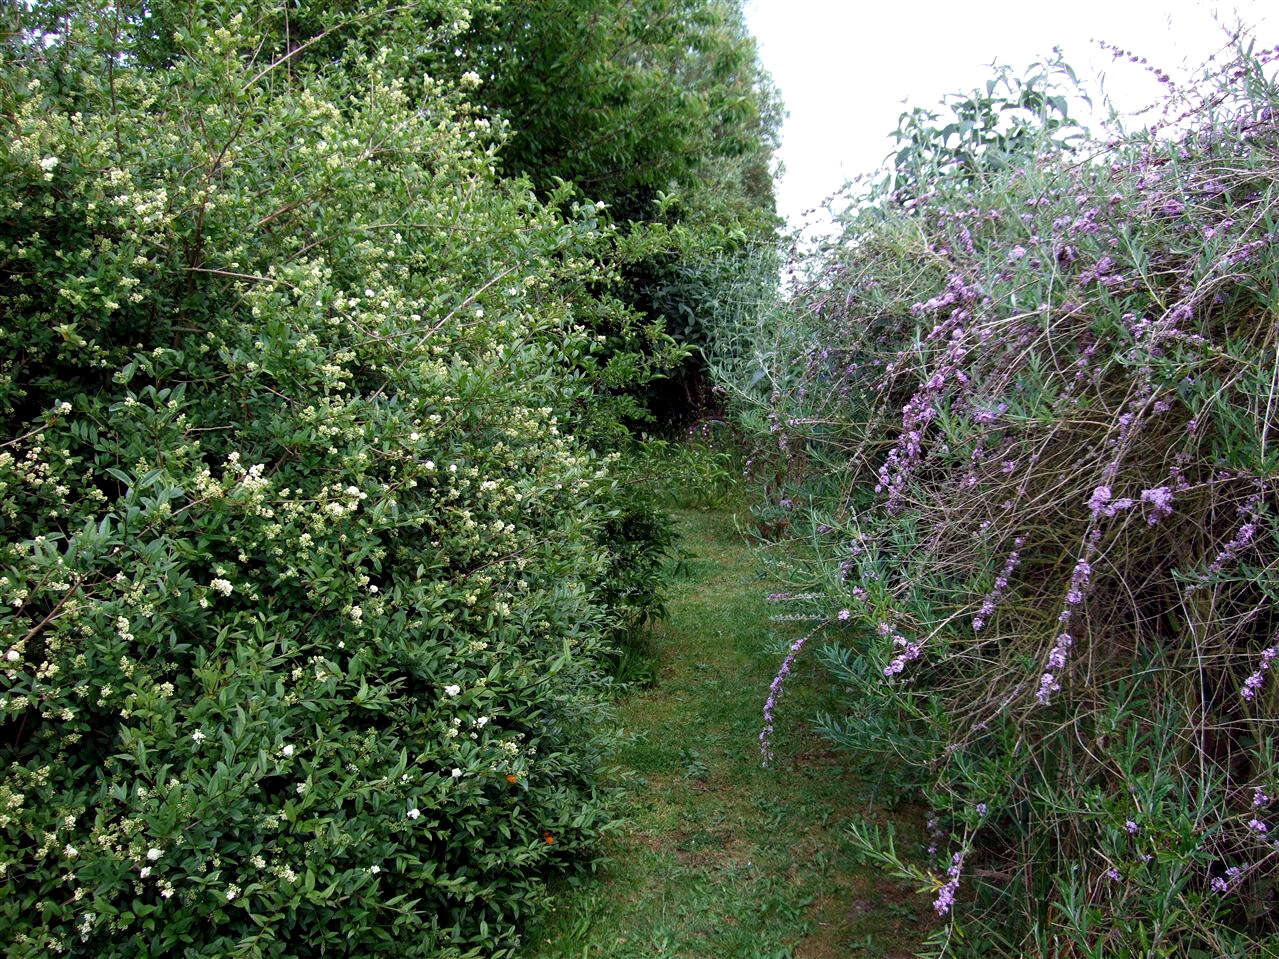 Just like two classic pubs side by side - wild privet and buddleia alternifolia perform a classic nectar double act.